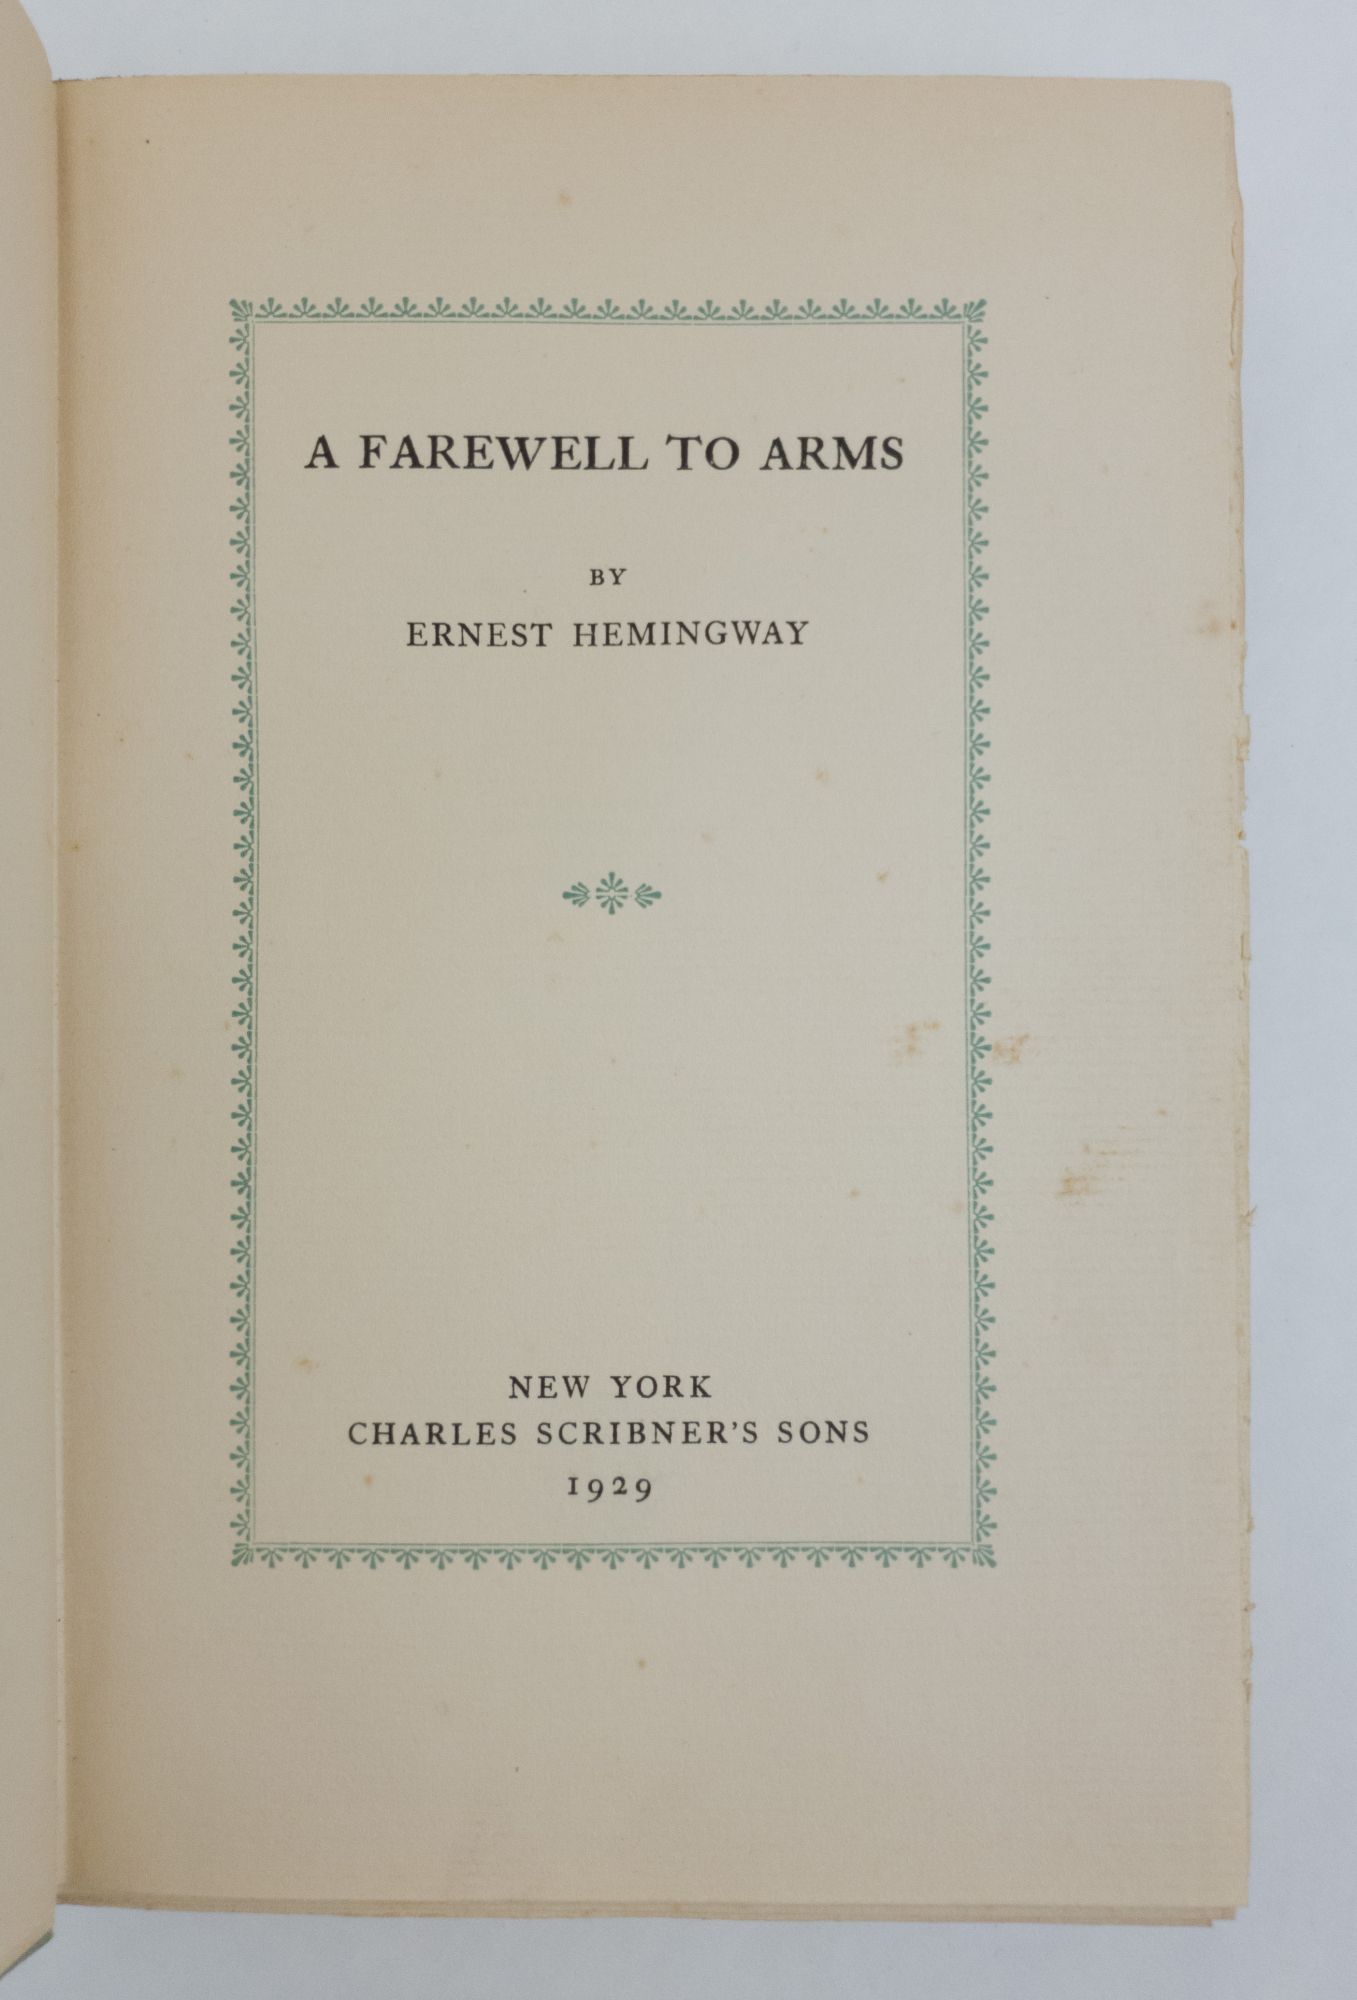 Product Image for A FAREWELL TO ARMS [Signed]